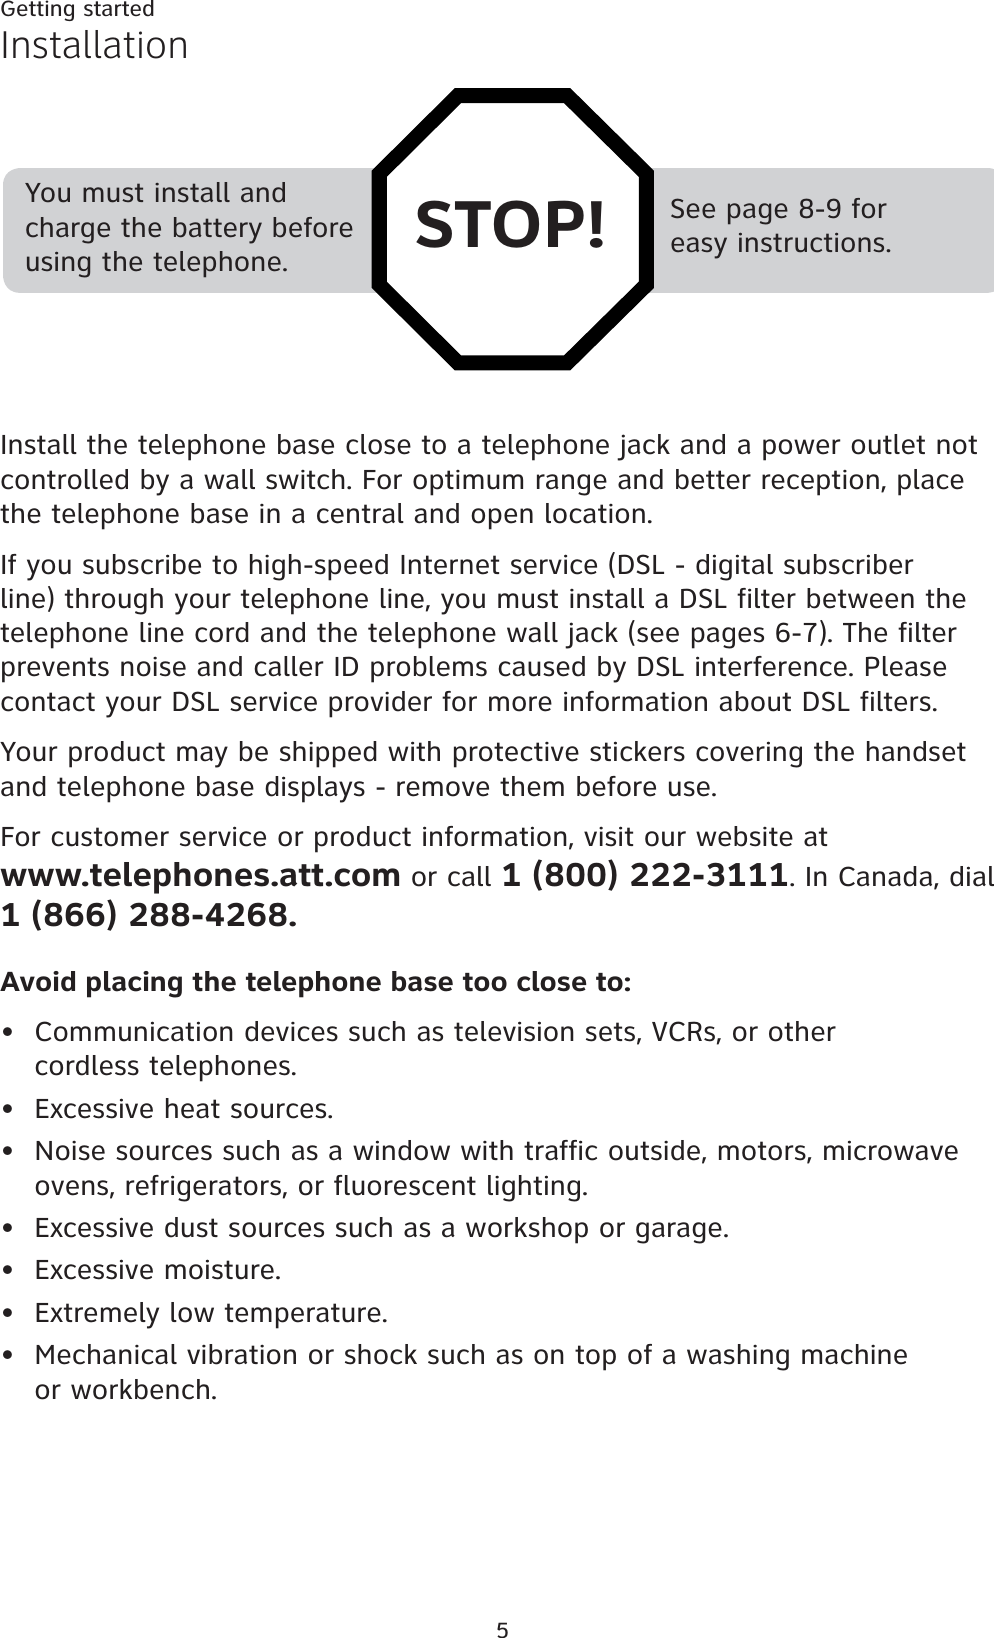 5Getting startedSee page 8-9 for easy instructions.You must install and charge the battery before using the telephone. STOP!InstallationInstall the telephone base close to a telephone jack and a power outlet not controlled by a wall switch. For optimum range and better reception, place the telephone base in a central and open location.If you subscribe to high-speed Internet service (DSL - digital subscriber line) through your telephone line, you must install a DSL filter between the telephone line cord and the telephone wall jack (see pages 6-7). The filter prevents noise and caller ID problems caused by DSL interference. Please contact your DSL service provider for more information about DSL filters.Your product may be shipped with protective stickers covering the handset and telephone base displays - remove them before use.For customer service or product information, visit our website at www.telephones.att.com or call 1 (800) 222-3111. In Canada, dial1 (866) 288-4268.Avoid placing the telephone base too close to:Communication devices such as television sets, VCRs, or other cordless telephones.Excessive heat sources.Noise sources such as a window with traffic outside, motors, microwave ovens, refrigerators, or fluorescent lighting.Excessive dust sources such as a workshop or garage.Excessive moisture.Extremely low temperature.Mechanical vibration or shock such as on top of a washing machine or workbench.•••••••